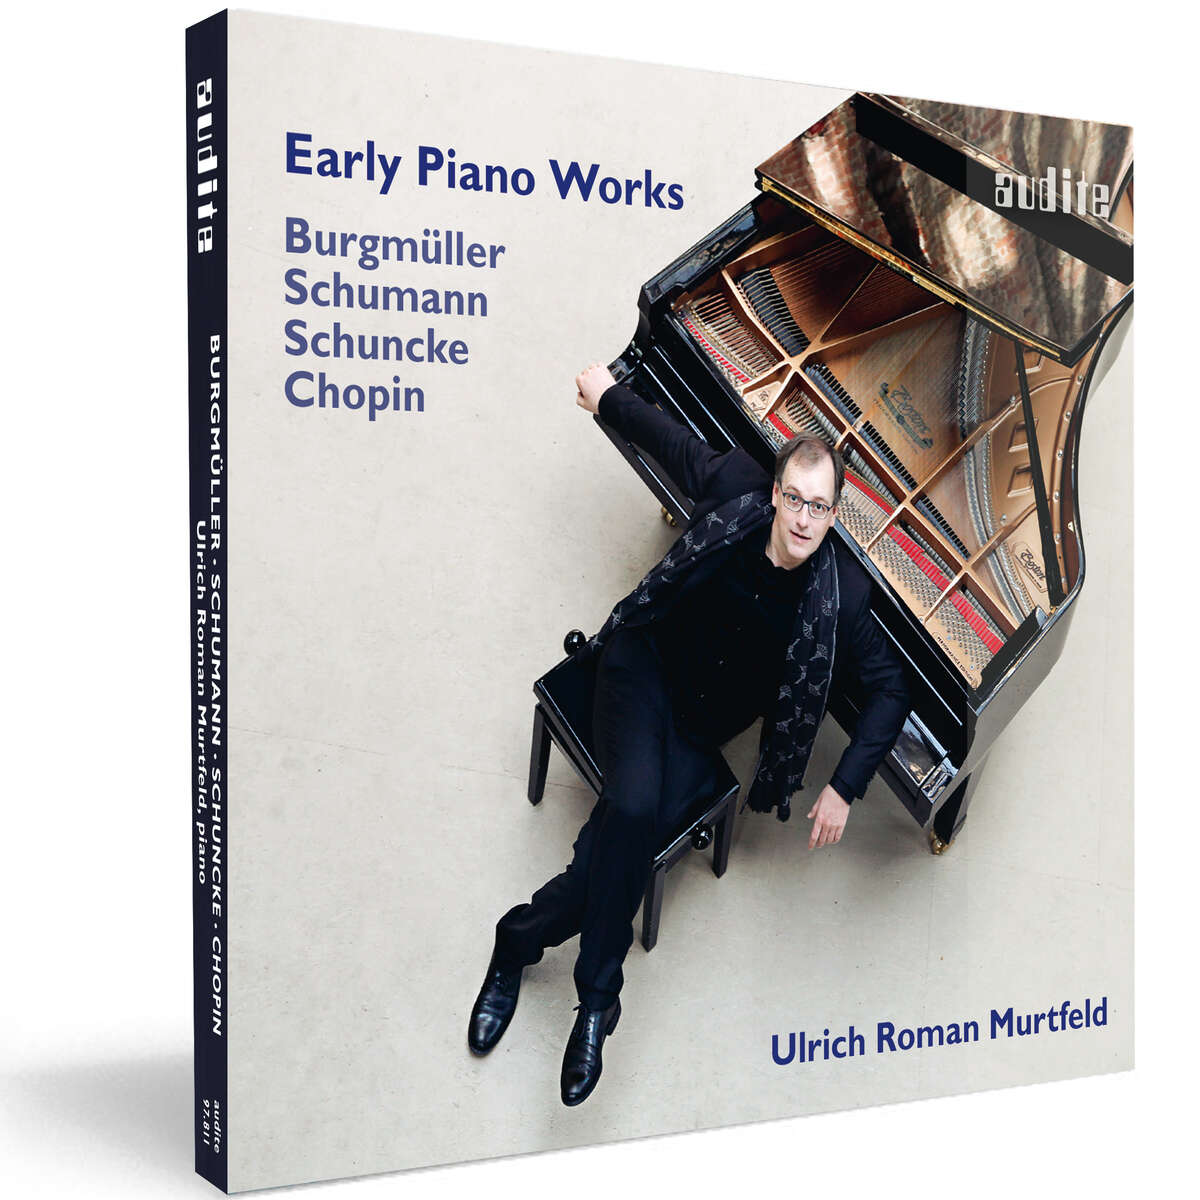 Early　...　Burgmüller,　Piano　Schumann　Chopin,　Works　by　audite